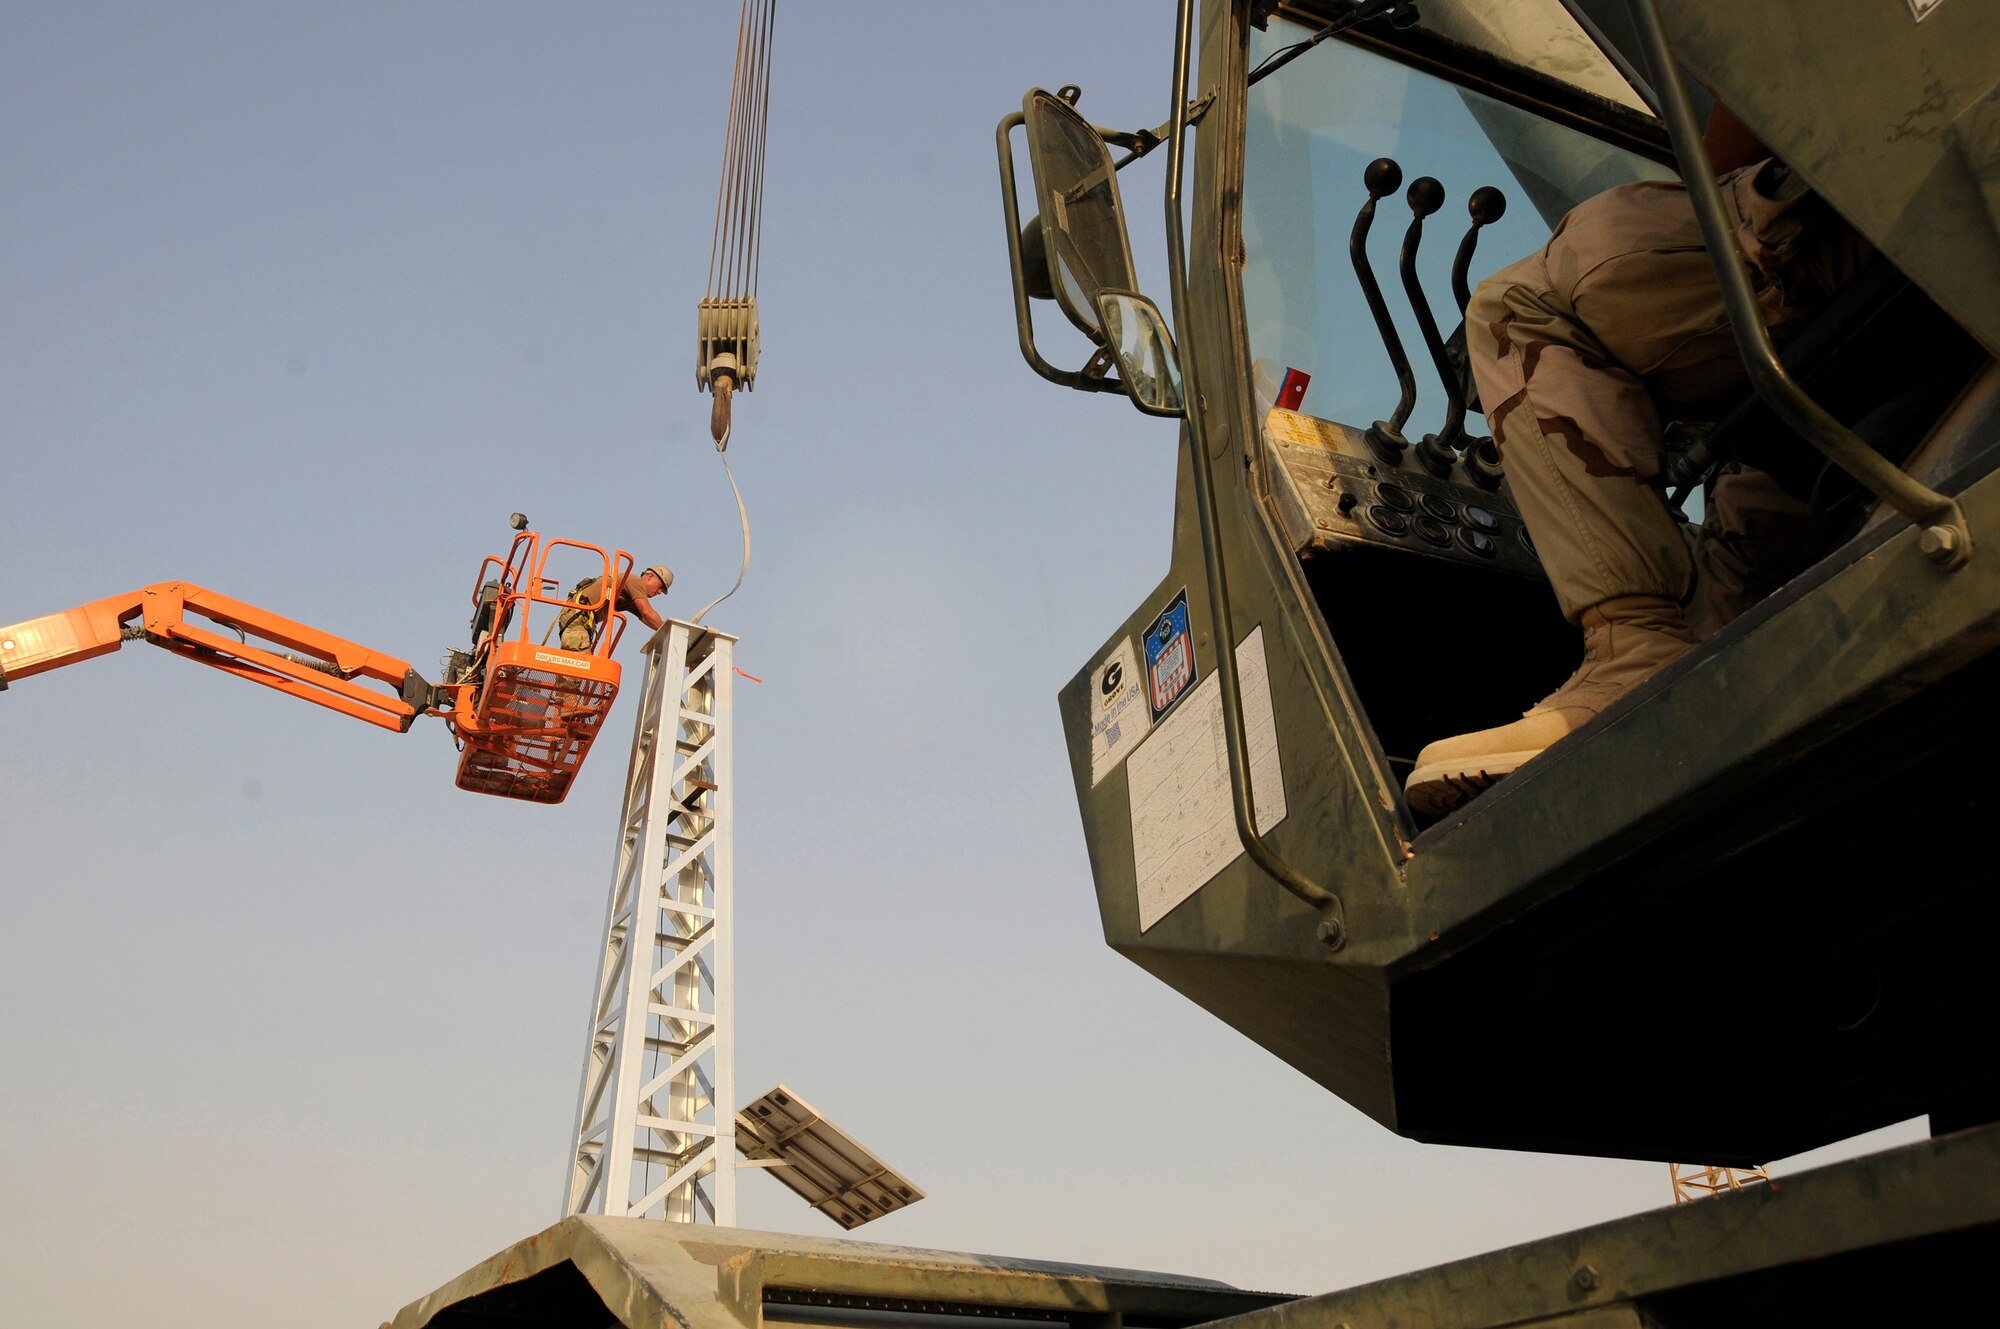 Airman 1st Class Joshua Slaughter, 379th Civil Engineer Squadron, disconnects a strap that was used to connect a new tower to the crane Aug. 26, 2008, at an undisclosed air base in Southwest Asia. Airman Slaughter working from a man lift works from a height even with the top of the tower to loosen and remove the strap. Airman Slaughter along with Senior Airman Kyle Troxell, 379 ECES, are members of a team exchanging aging towers with a sturdier replacement that should last nearly twice as long.  The Giant Voice system is used to communicate important information to all base populace instantaneously.  Airman Slaughter, a native of Eagle, Neb., is deployed from Travis Air Force Base, Calif. Airman Troxell is deployed from Scott Air Force Base, Ill. Both are deployed in support of Operations Iraqi and Enduring Freedom and Joint Task Force-Horn of Africa.  (U.S. Air Force photo by Tech. Sgt. Michael Boquette/Released)